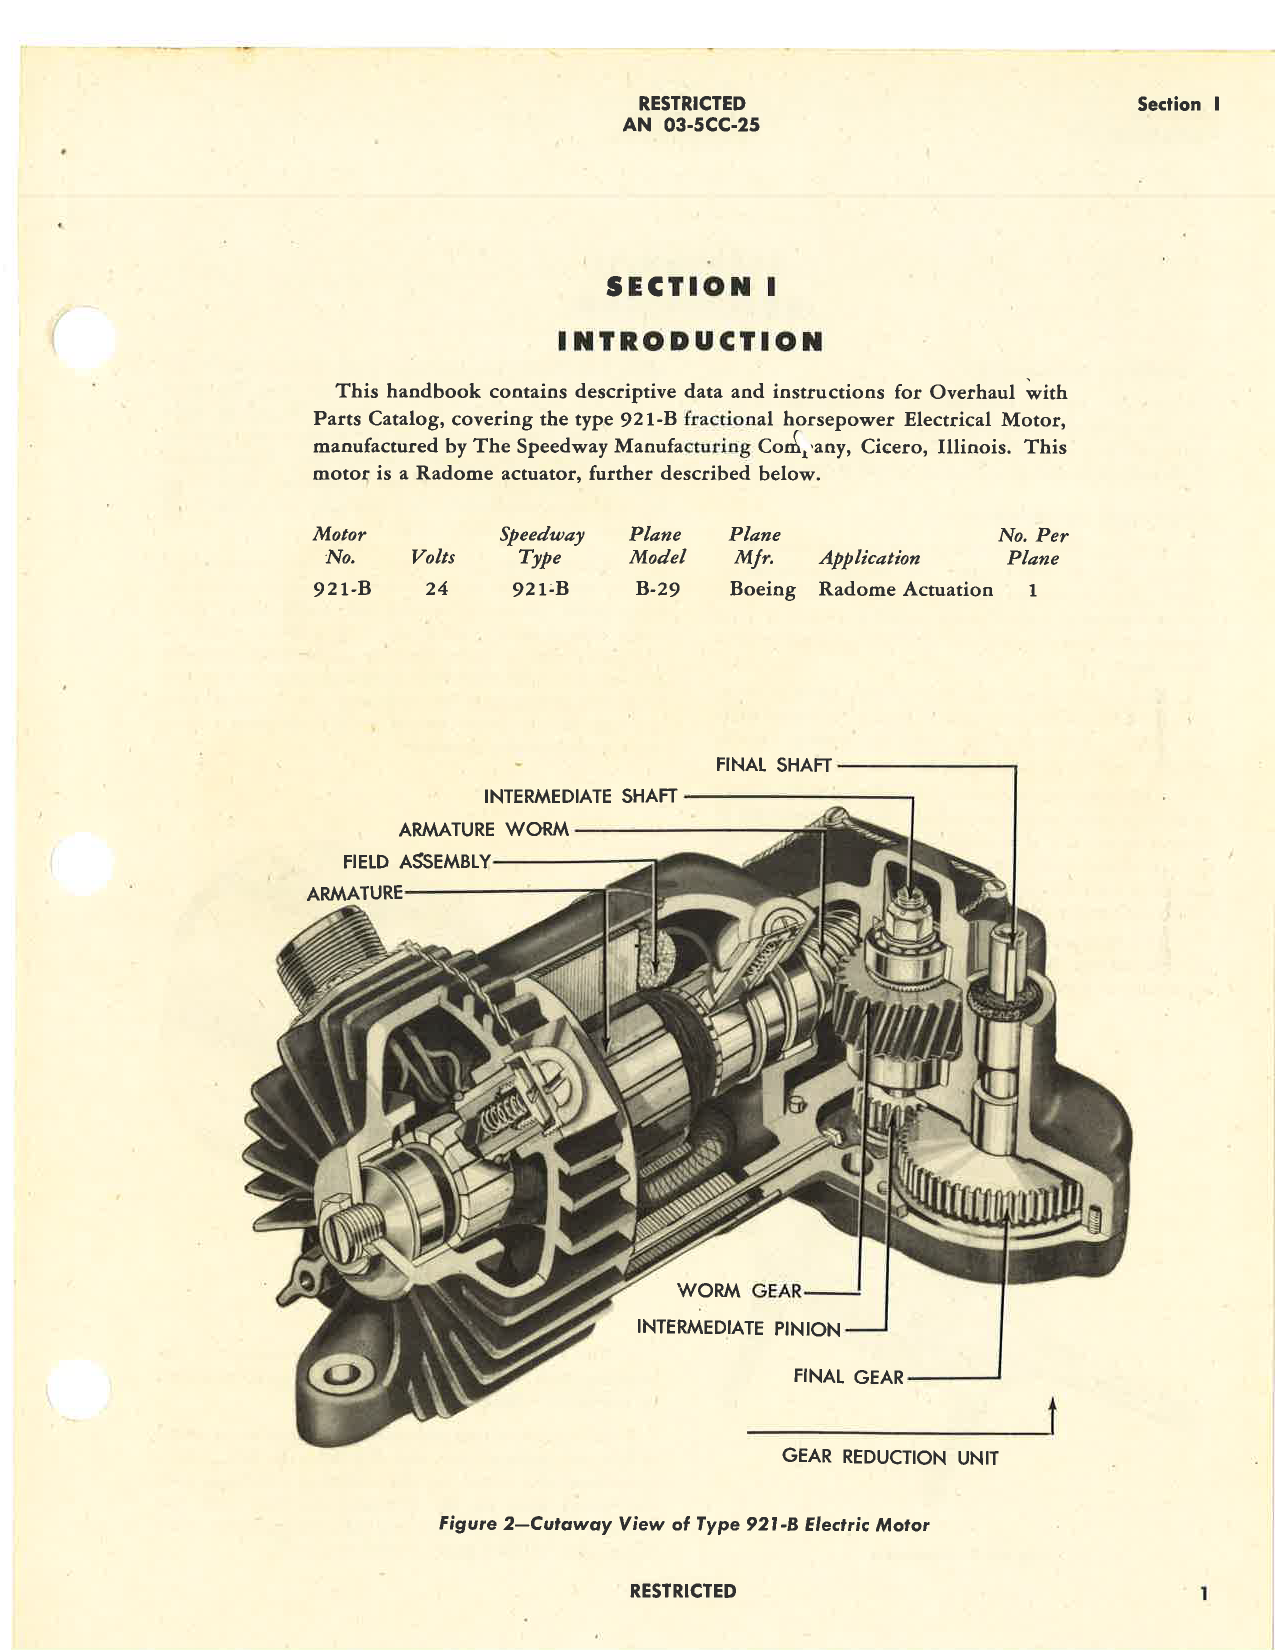 Sample page 5 from AirCorps Library document: Overhaul Instructions with Parts Catalog for Type 921-B Fractional Horsepower Electrical Motor